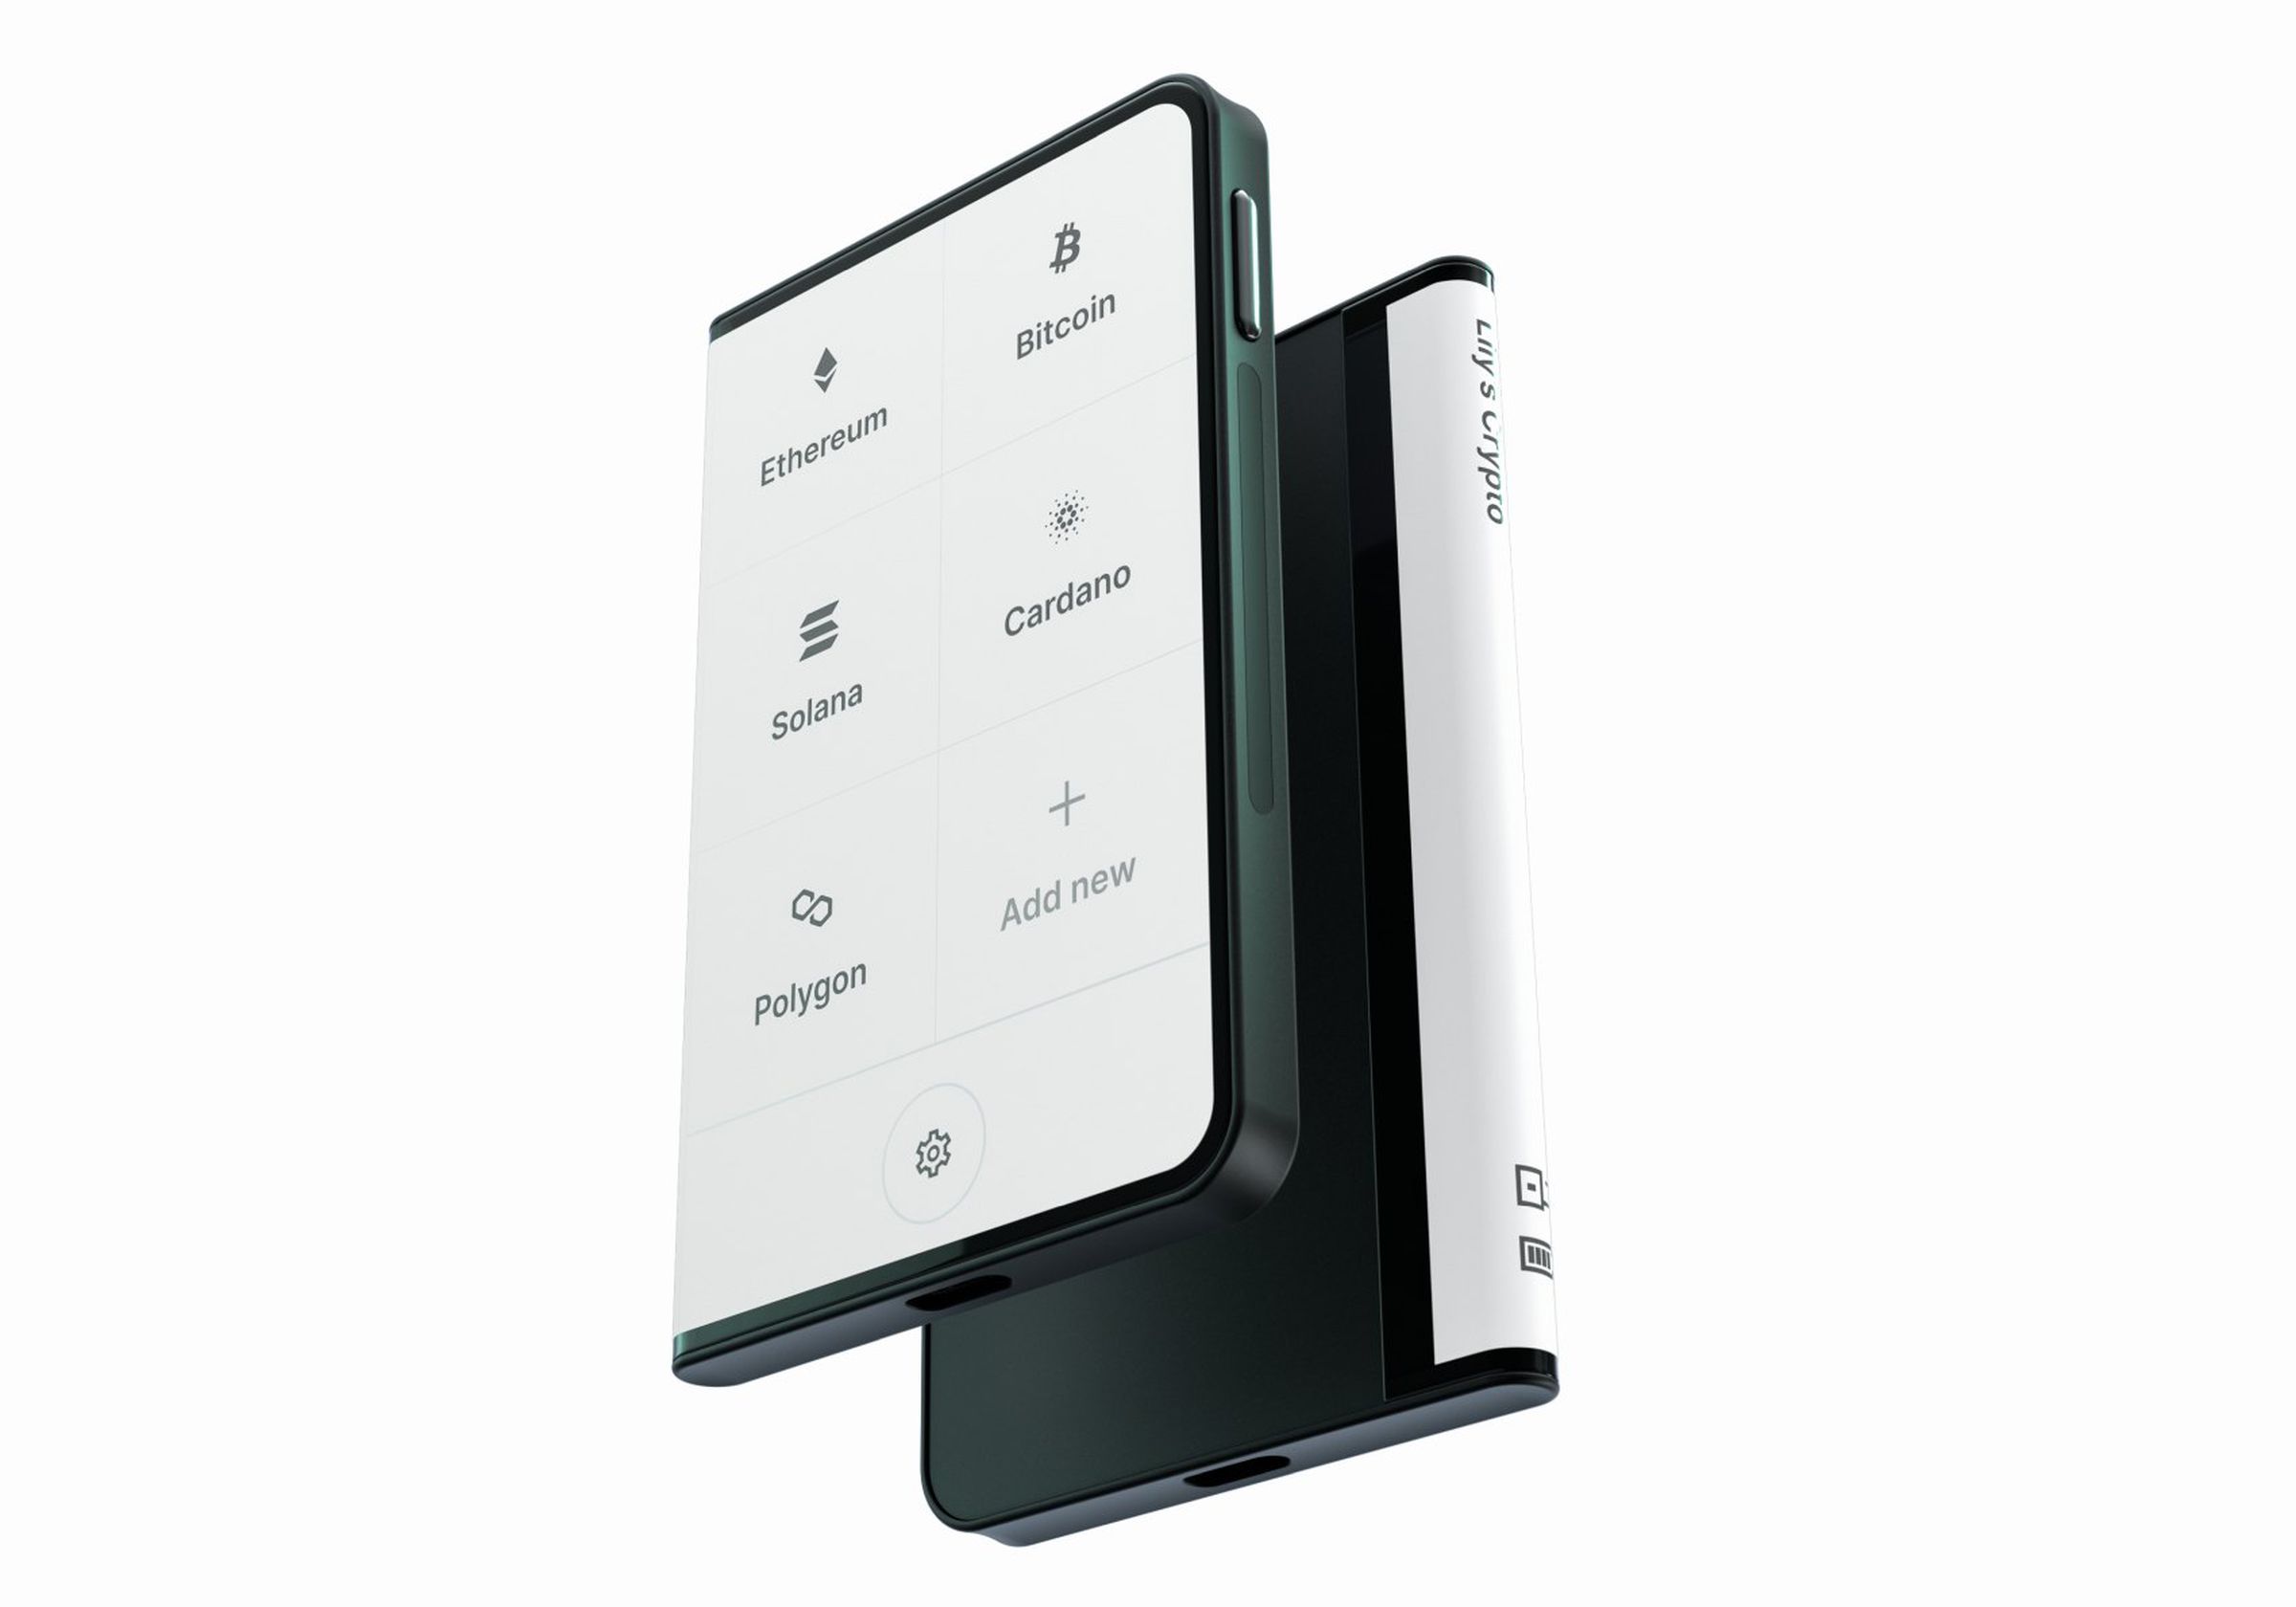 Ledger Stax crypto wallet, shown back and front, with an E Ink display, USB-C charging port, and side-mounted button.